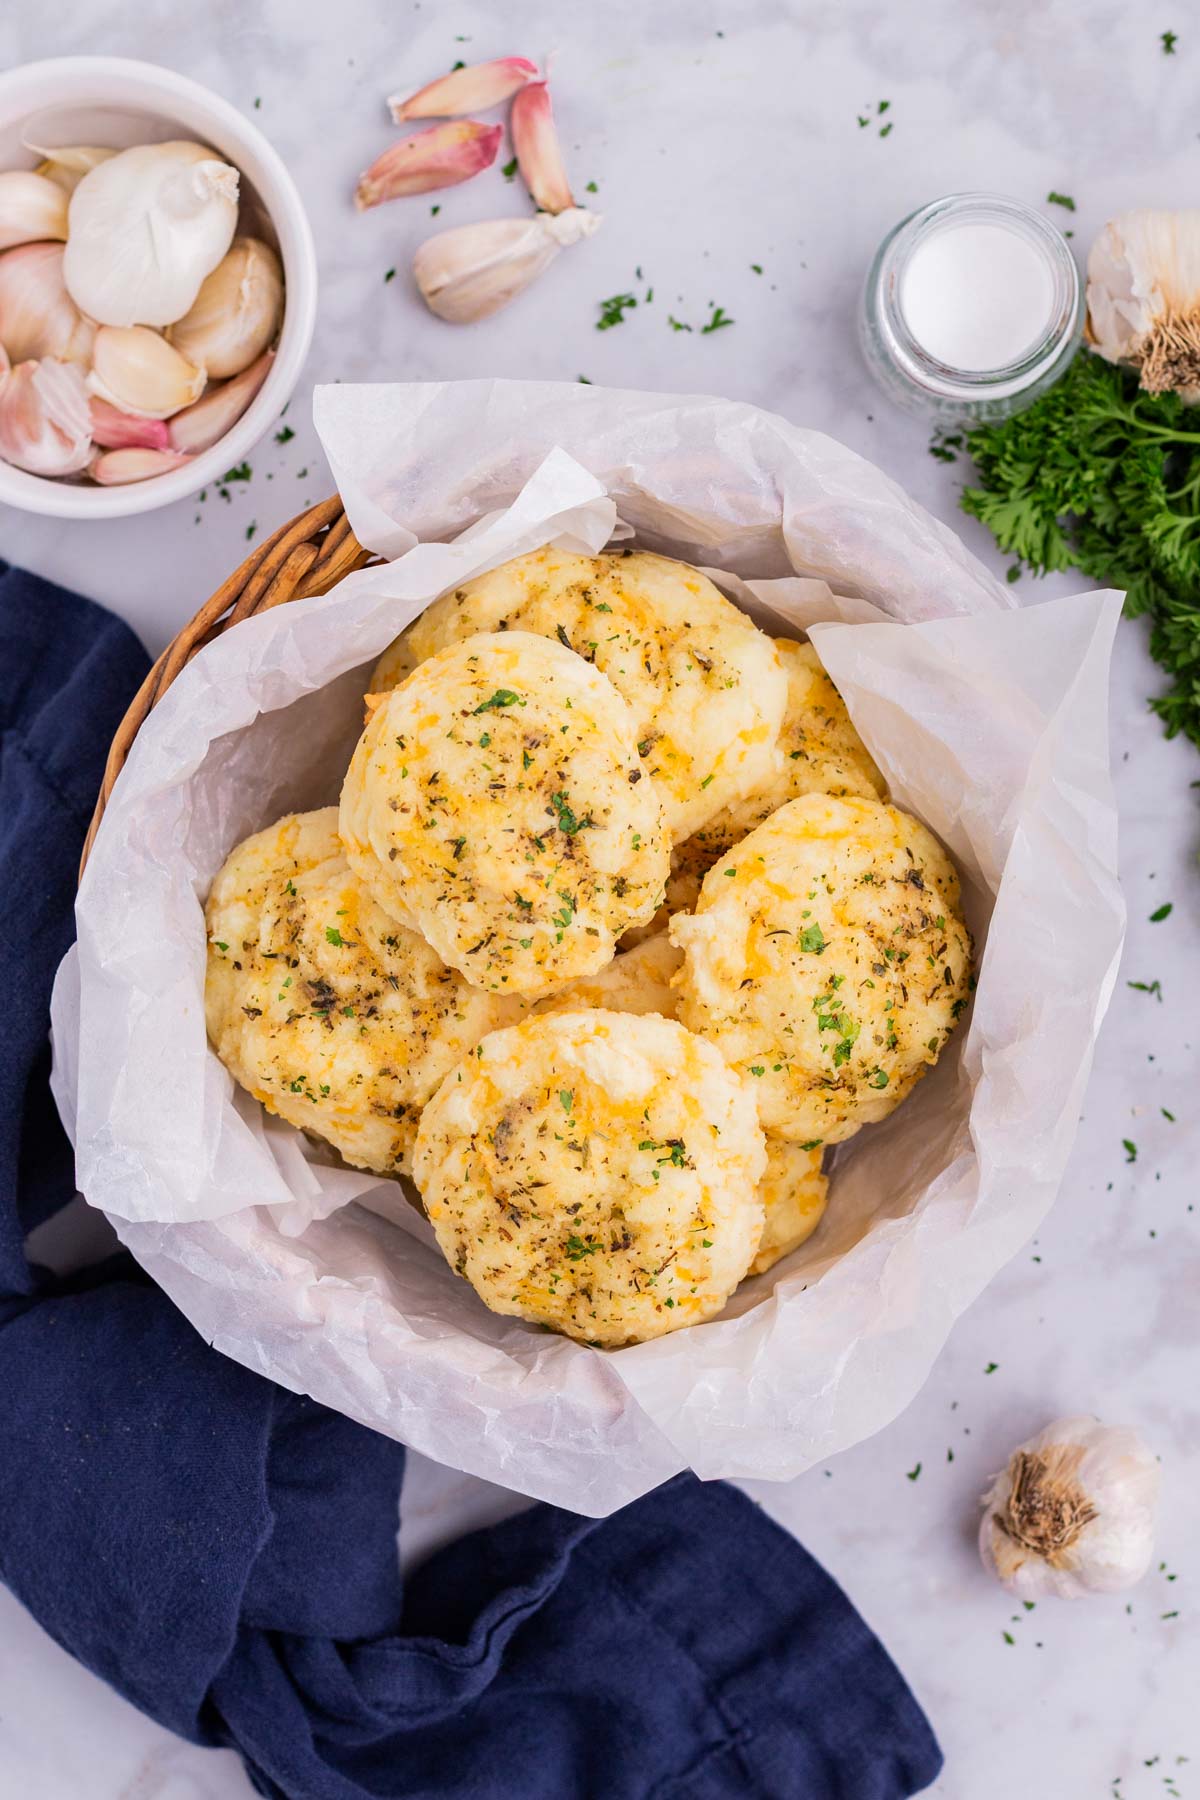 A basket of cheddar bay biscuits are served.